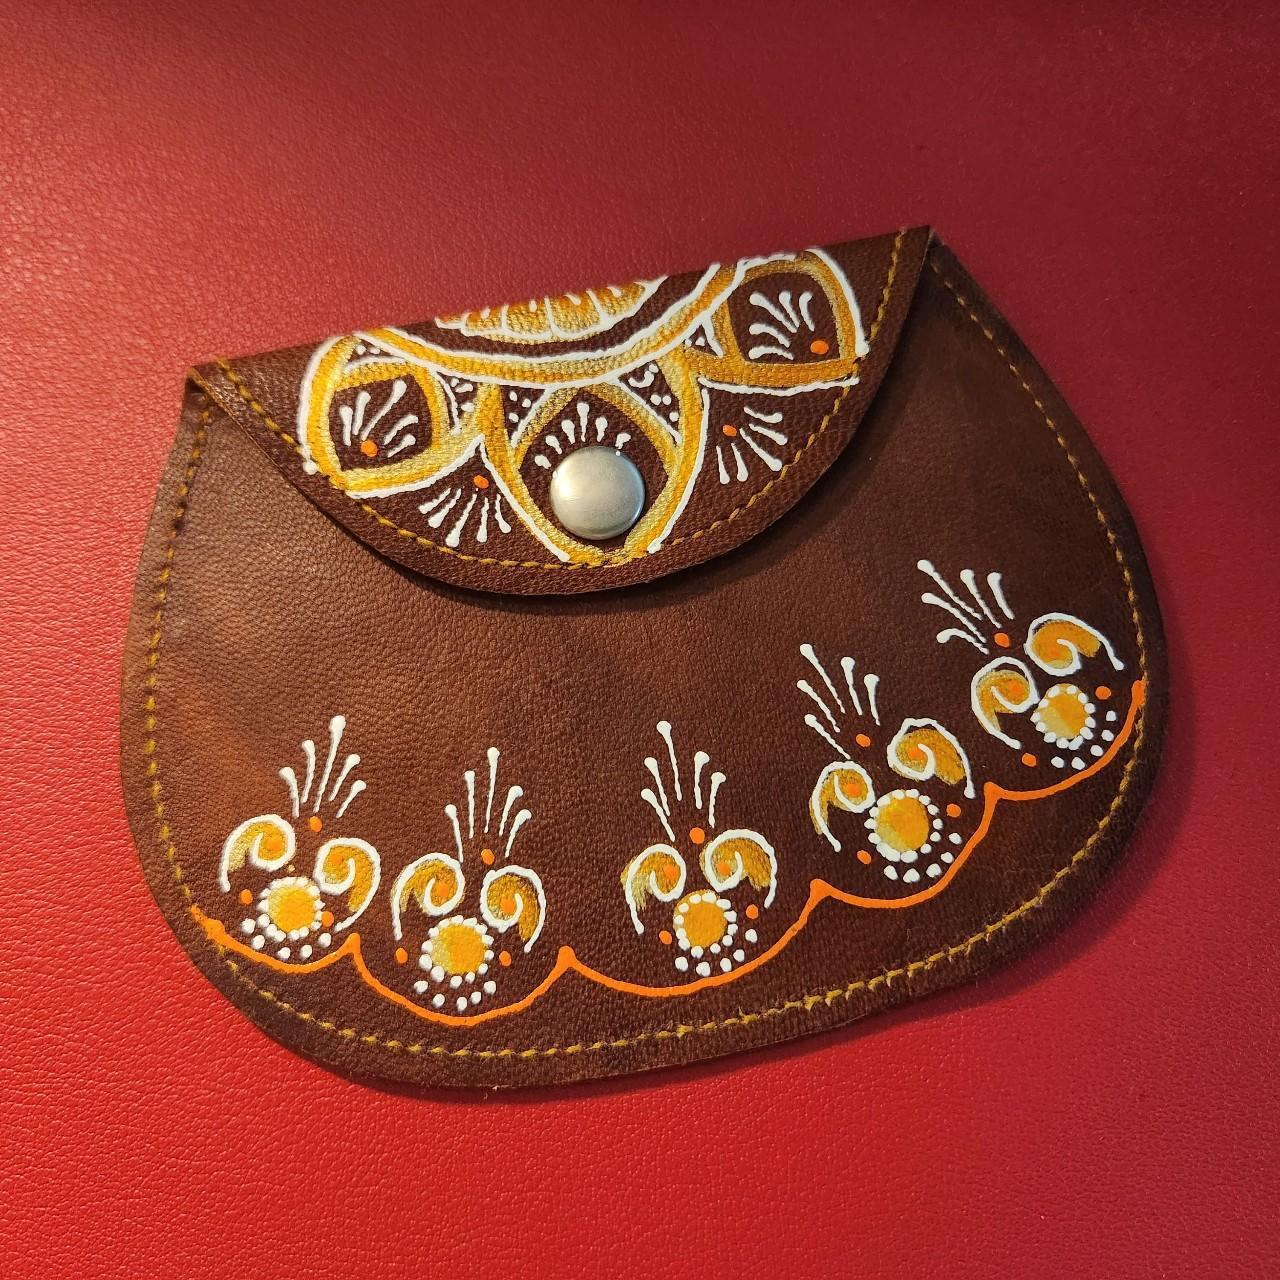 Shop Small Leather Coin Purse Online India at Nutcaseshop.com